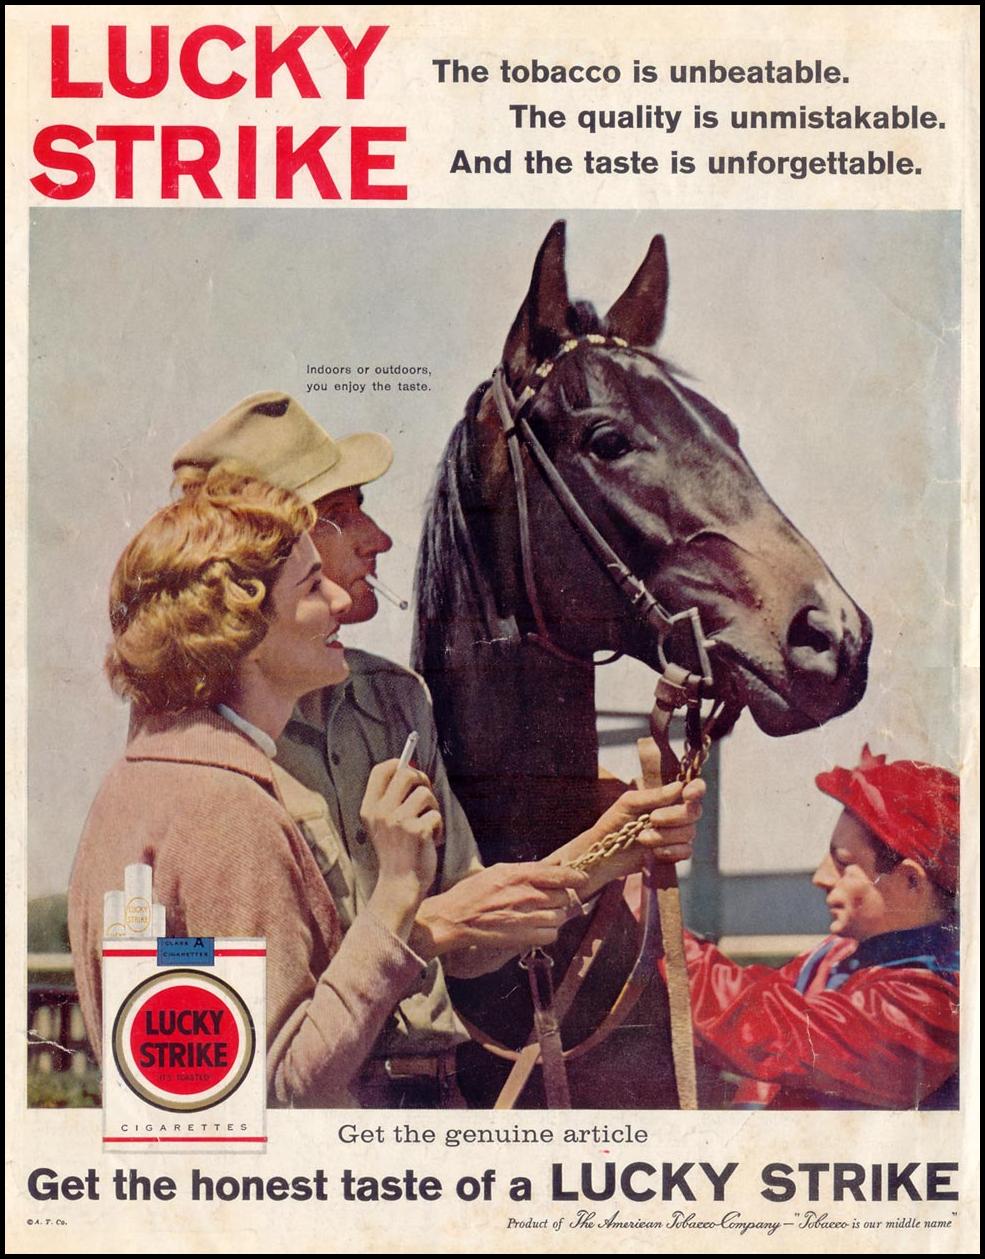 LUCKY STRIKE CIGARETTES
SATURDAY EVENING POST
08/15/1959
BACK COVER